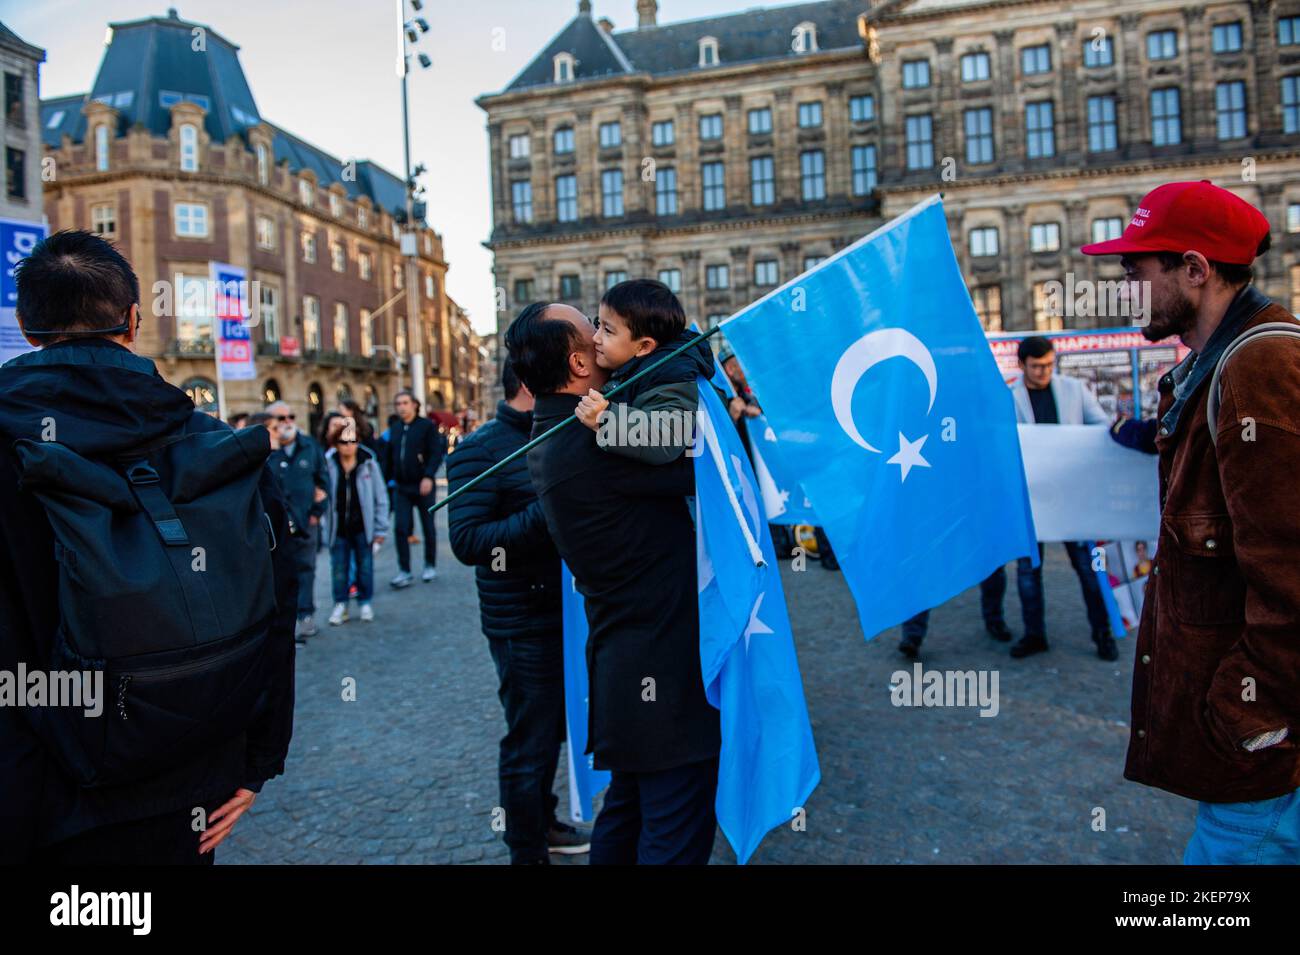 An Uyghur man is seen hugging his son while holding Uyghur flags during an event to commemorate the 'National Day of East Turkistan'. November 12th marks the Republic Day of East Turkistan, which is also known as Xinjiang Uyghur Autonomous Region of China, the Uyghur community living in The Netherlands, organized an event to commemorate the 'National Day of East Turkistan' and to keep fighting against the Chinese government in order to take back their independence. The Chinese government has reportedly detained more than a million Muslims in reeducation camps. Most of the people who have been Stock Photo